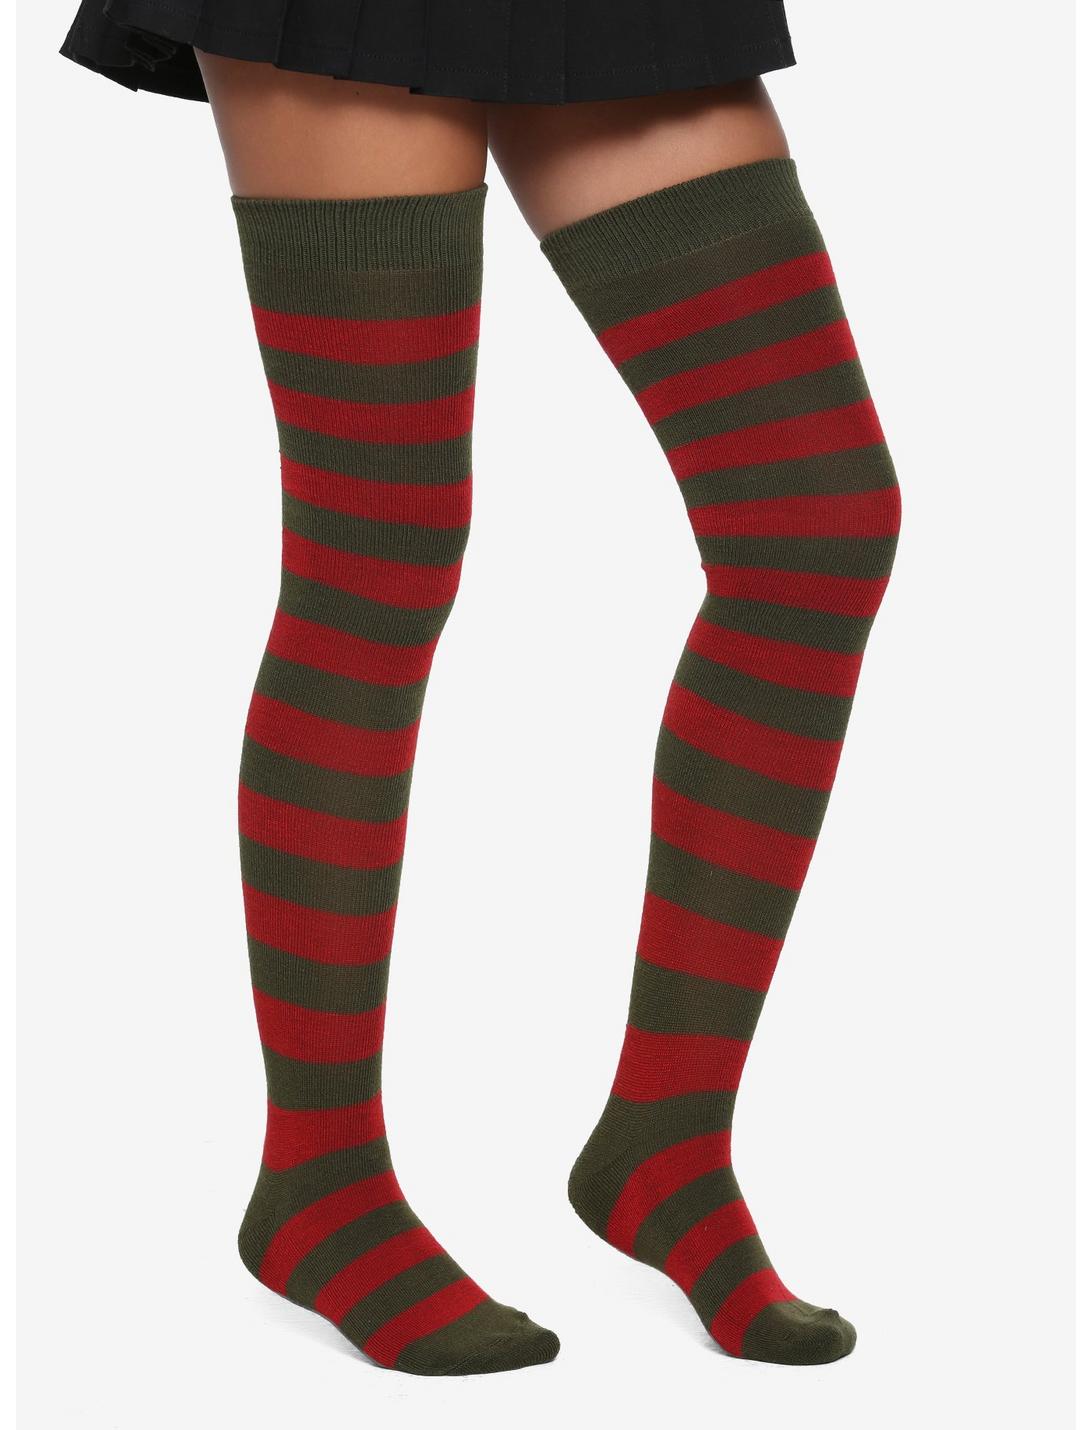 Green And Red Striped Over-The-Knee Socks, , hi-res